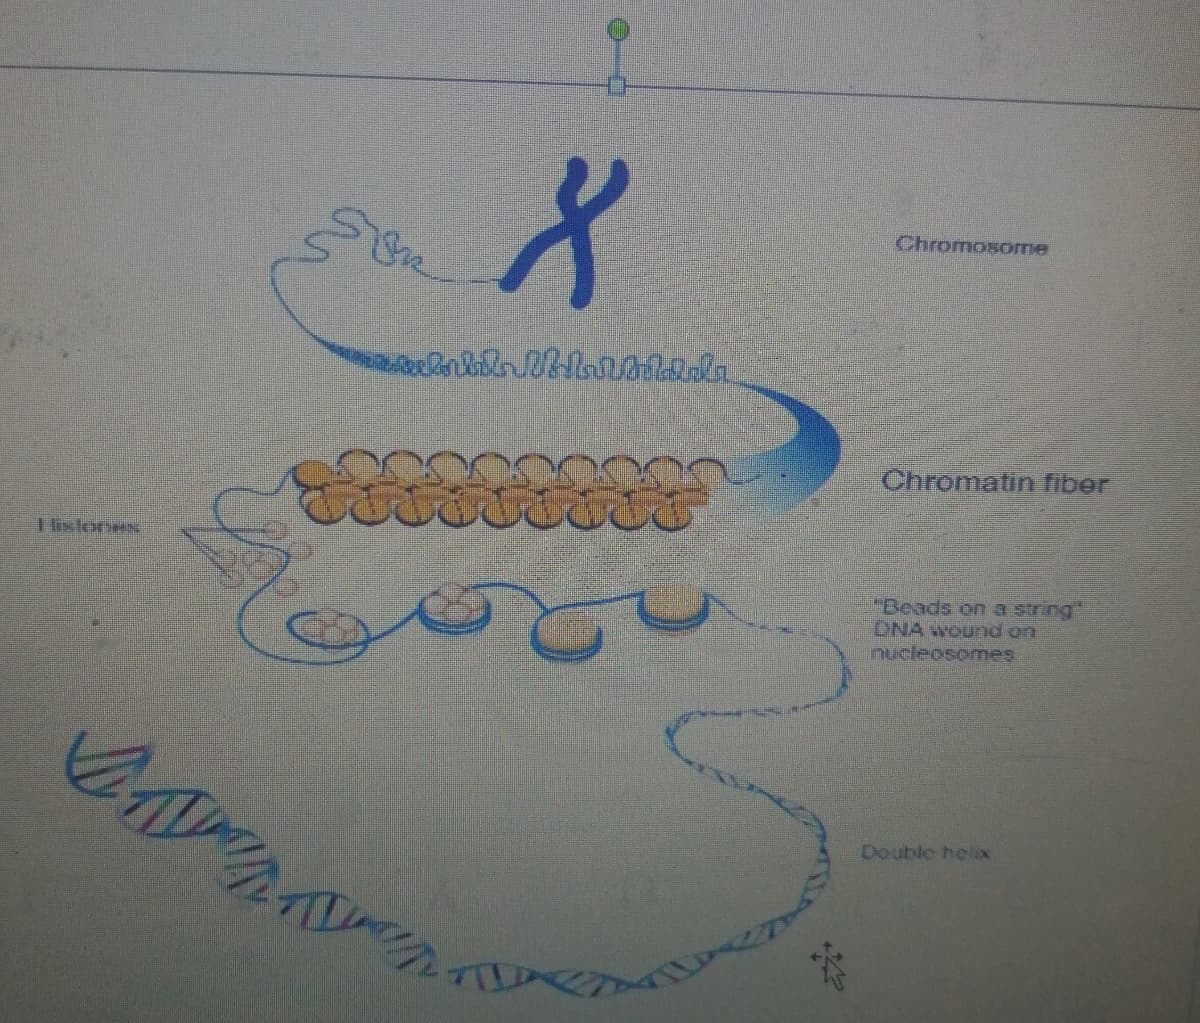 Chromosome
Chromatin fiber
"Beads on a string"
DNA wound on
nucleosomes
Double helix
